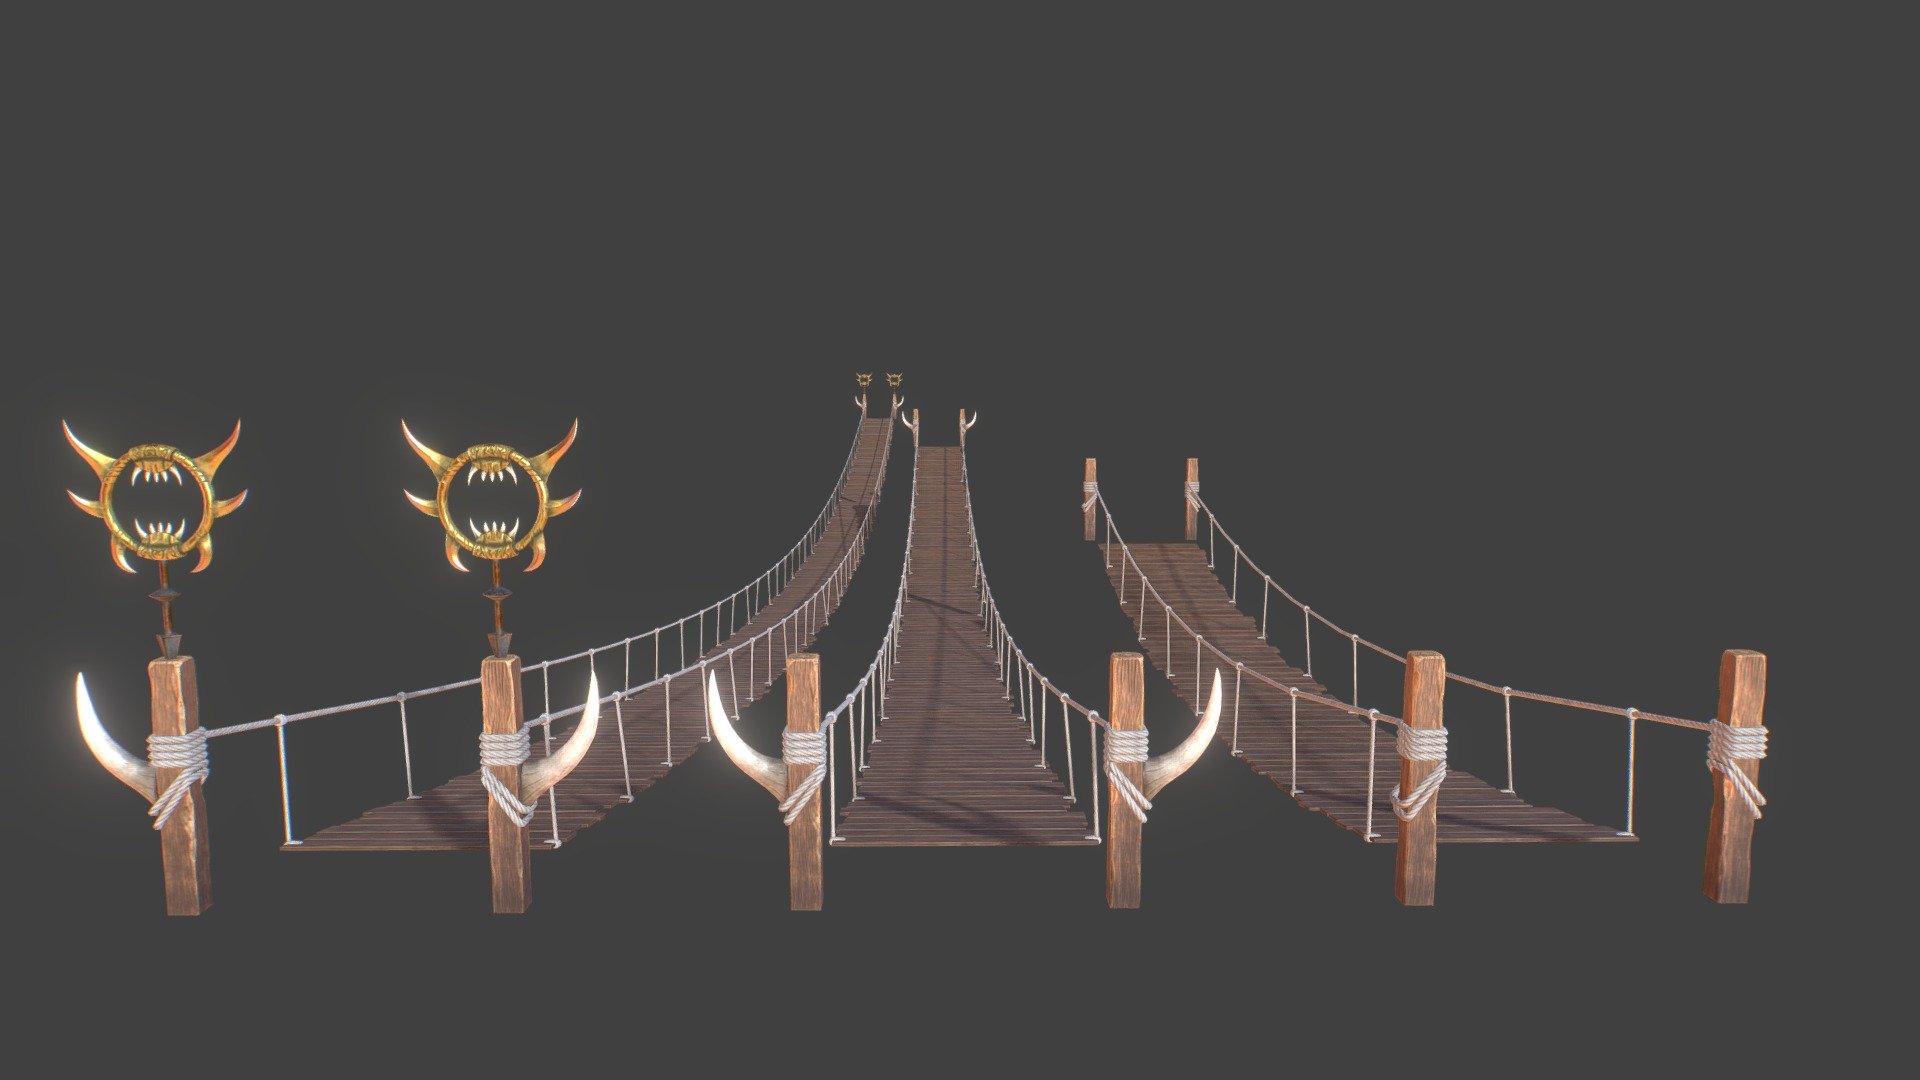 Wooden Bridges Pack.
20, 40, 60, 80 and 100 meters bridges with 3 types of bulks. Width is 2.4 meters. LODs are included. Everything is PBR.




5 fbx meshes of bridges with different length.

1 fbx mesh of bulks with 3 different types(assets).

2k textures for base bridge.

2k textures for bulks.

LODS
 - Wooden Bridges Pack - 3D model by paulgeraskin 3d model